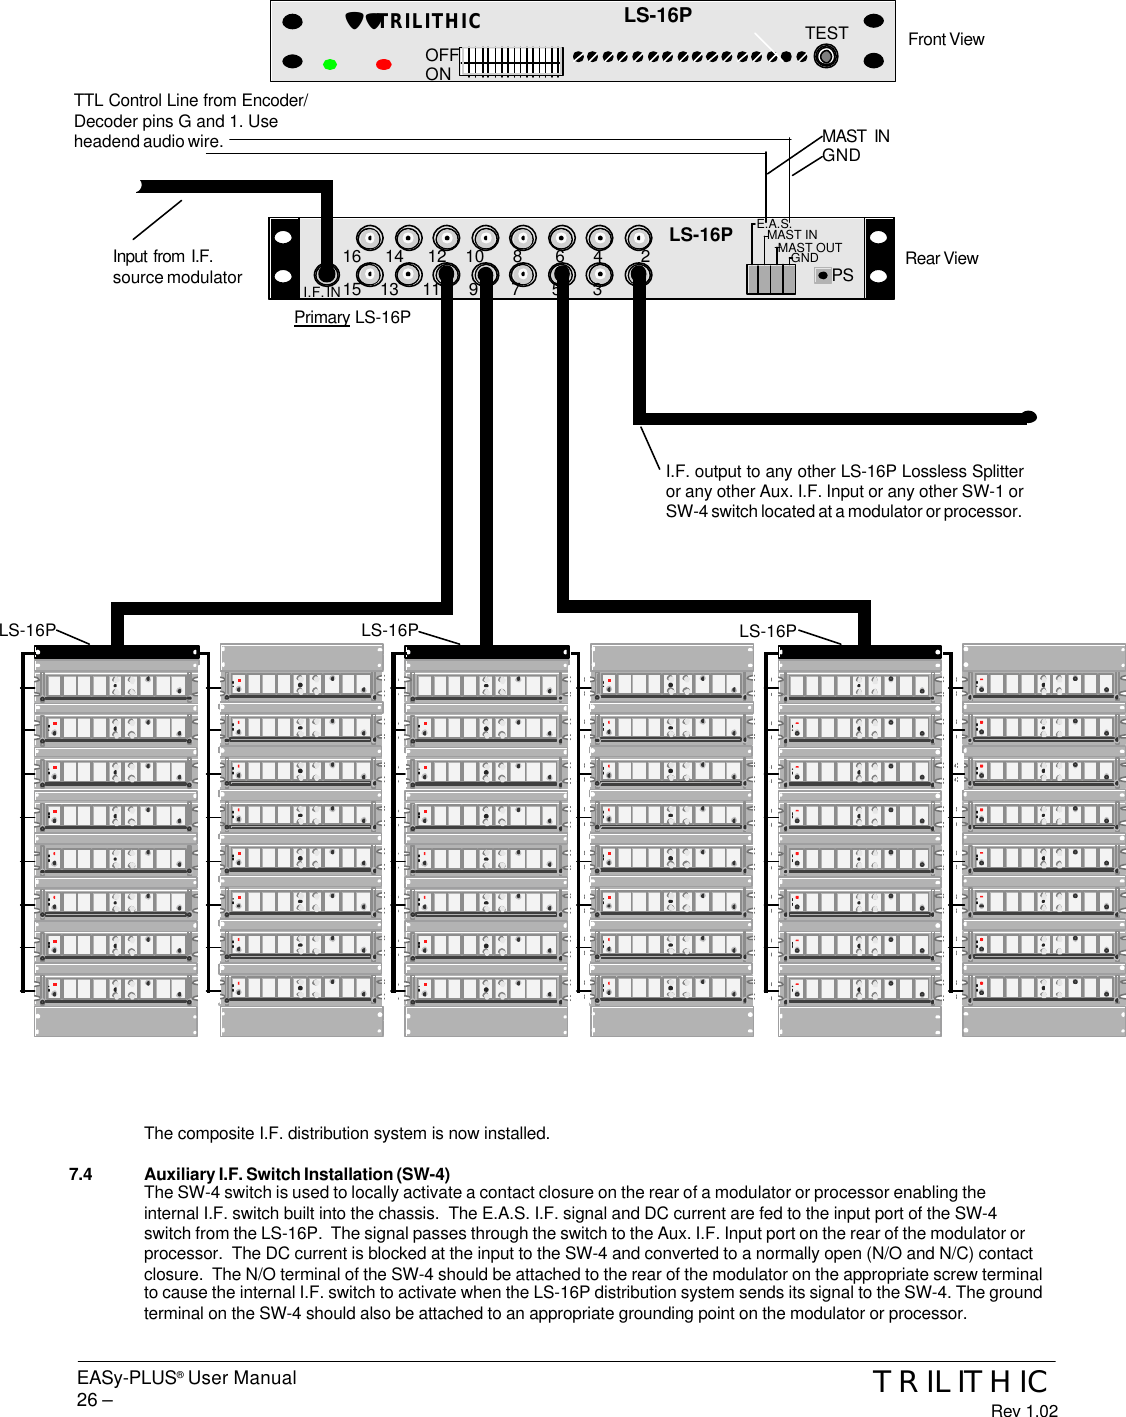 EASy-PLUS® User Manual26 – TRILITHICRev 1.02The composite I.F. distribution system is now installed.7.4 Auxiliary I.F. Switch Installation (SW-4)The SW-4 switch is used to locally activate a contact closure on the rear of a modulator or processor enabling theinternal I.F. switch built into the chassis.  The E.A.S. I.F. signal and DC current are fed to the input port of the SW-4switch from the LS-16P.  The signal passes through the switch to the Aux. I.F. Input port on the rear of the modulator orprocessor.  The DC current is blocked at the input to the SW-4 and converted to a normally open (N/O and N/C) contactclosure.  The N/O terminal of the SW-4 should be attached to the rear of the modulator on the appropriate screw terminalto cause the internal I.F. switch to activate when the LS-16P distribution system sends its signal to the SW-4. The groundterminal on the SW-4 should also be attached to an appropriate grounding point on the modulator or processor.Rear ViewFront ViewLS-16P15    13      11      9       7       5        3       1I.F. INOFFONTESTLS-16P??TRILITHIC16     14     12    10      8       6      4        2Input from I.F.source modulatorI.F. output to any other LS-16P Lossless Splitteror any other Aux. I.F. Input or any other SW-1 orSW-4 switch located at a modulator or processor.LS-16PPSLS-16P LS-16PPrimary LS-16PE.A.S.   MAST IN      MAST OUT          GNDMAST INGNDTTL Control Line from Encoder/Decoder pins G and 1. Useheadend audio wire.